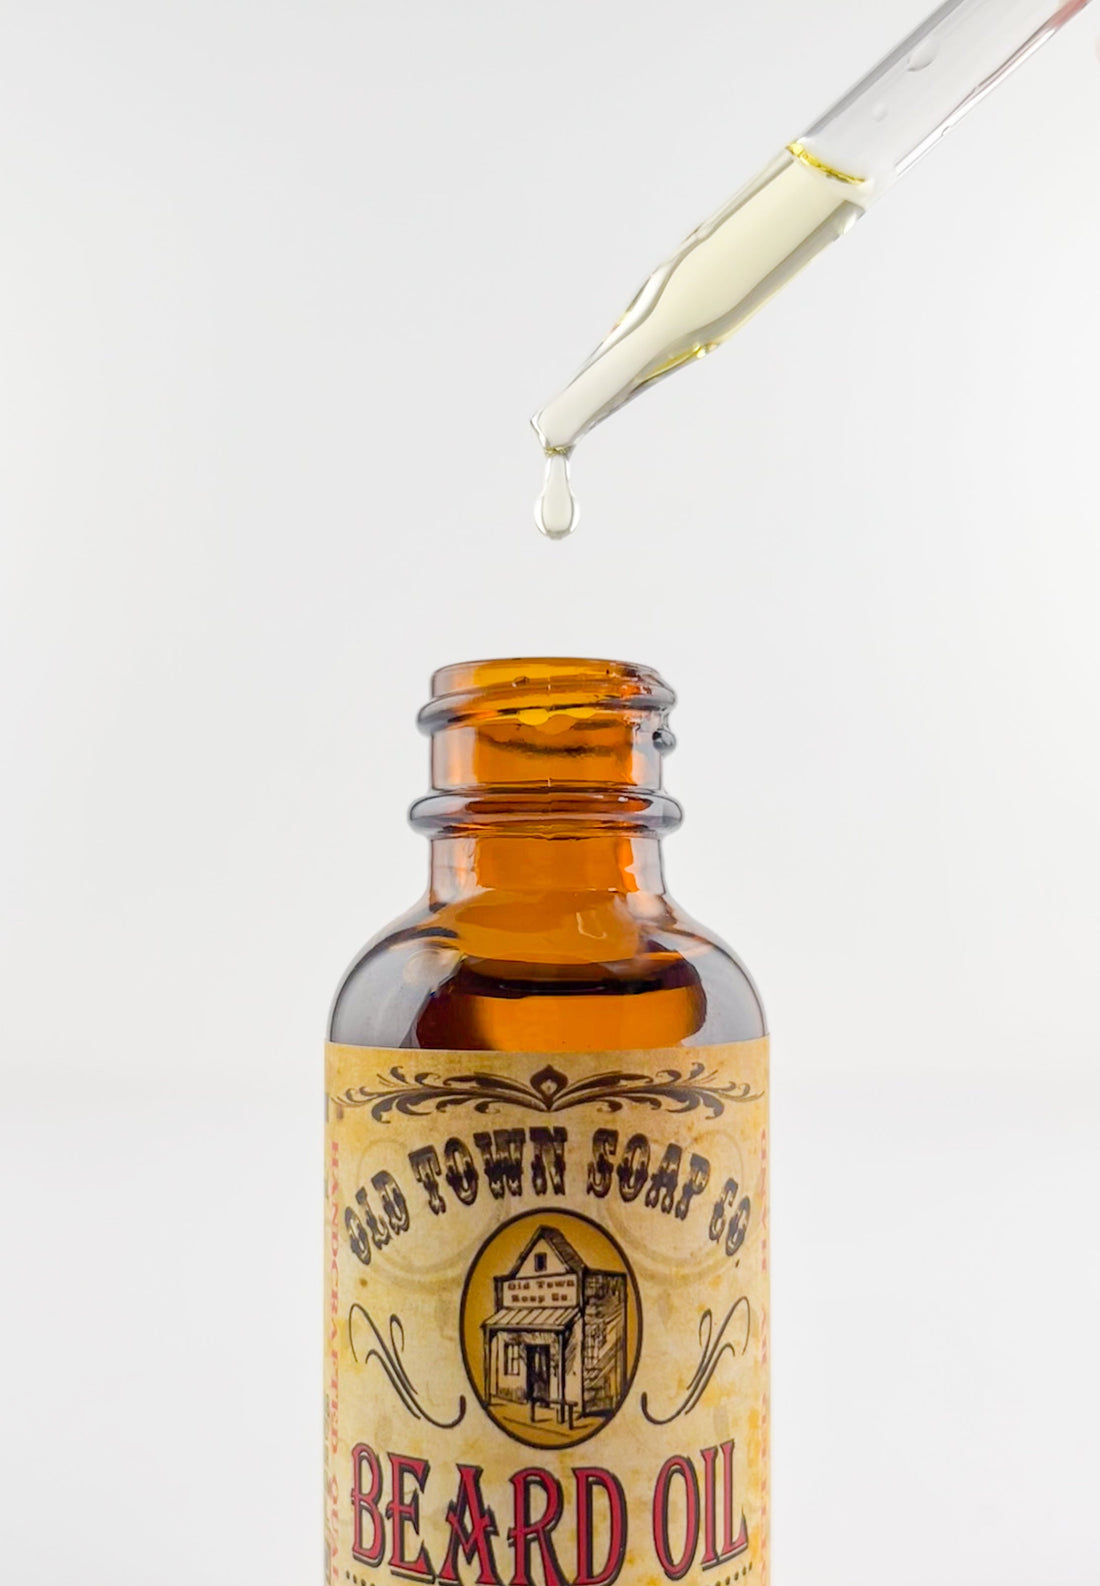 Sage Beard Oil - Old Town Soap Co.